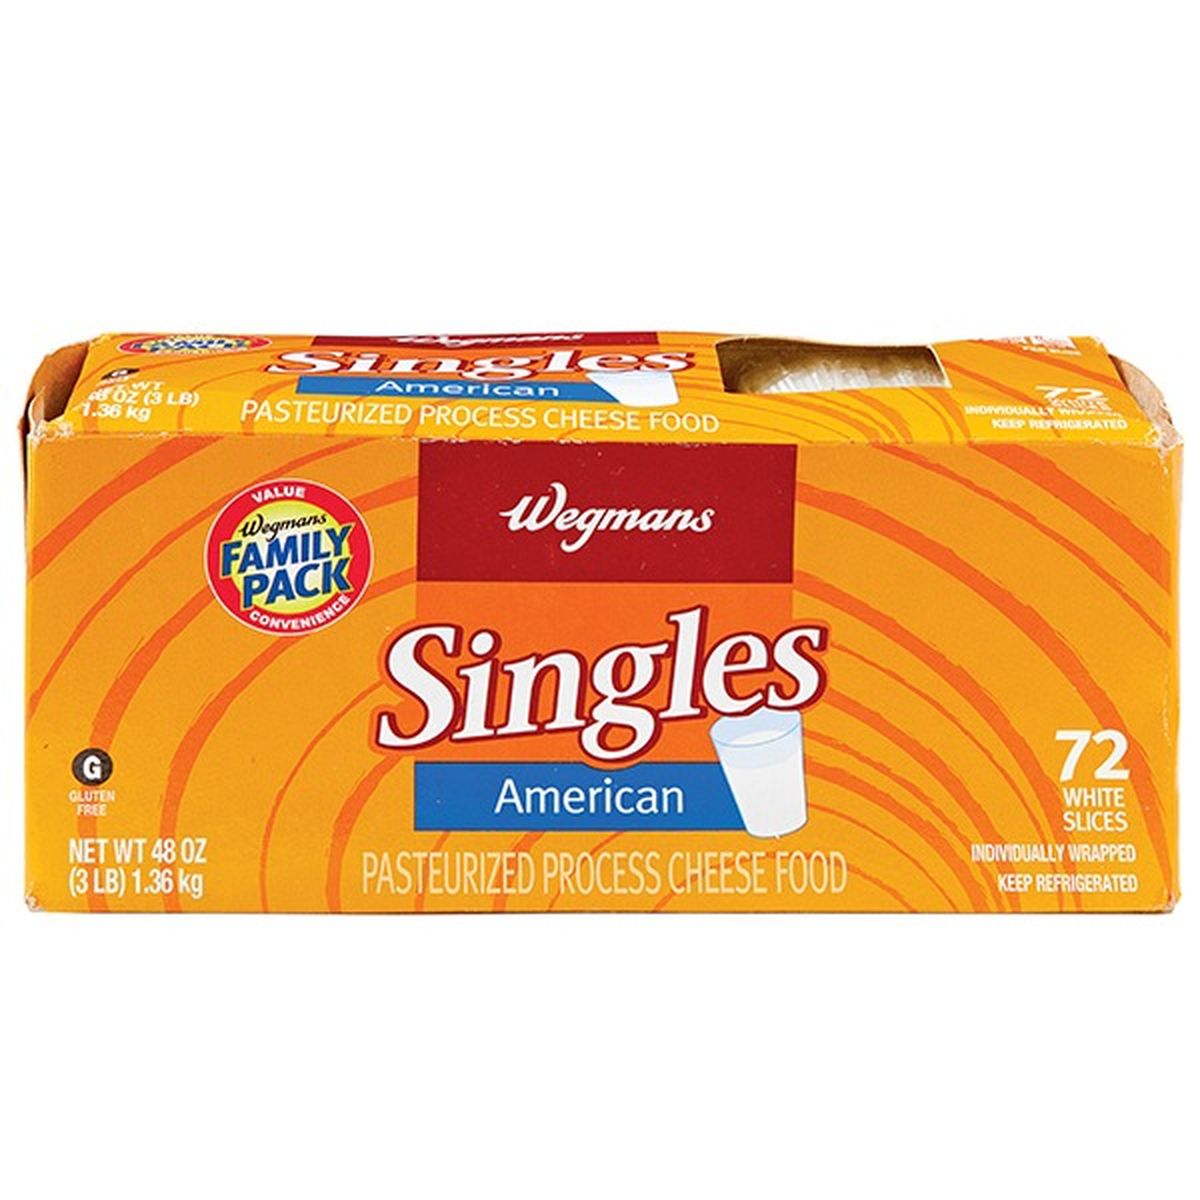 Calories in Wegmans Cheese, Singles, American, White, 72 Slices, FAMILY PACK